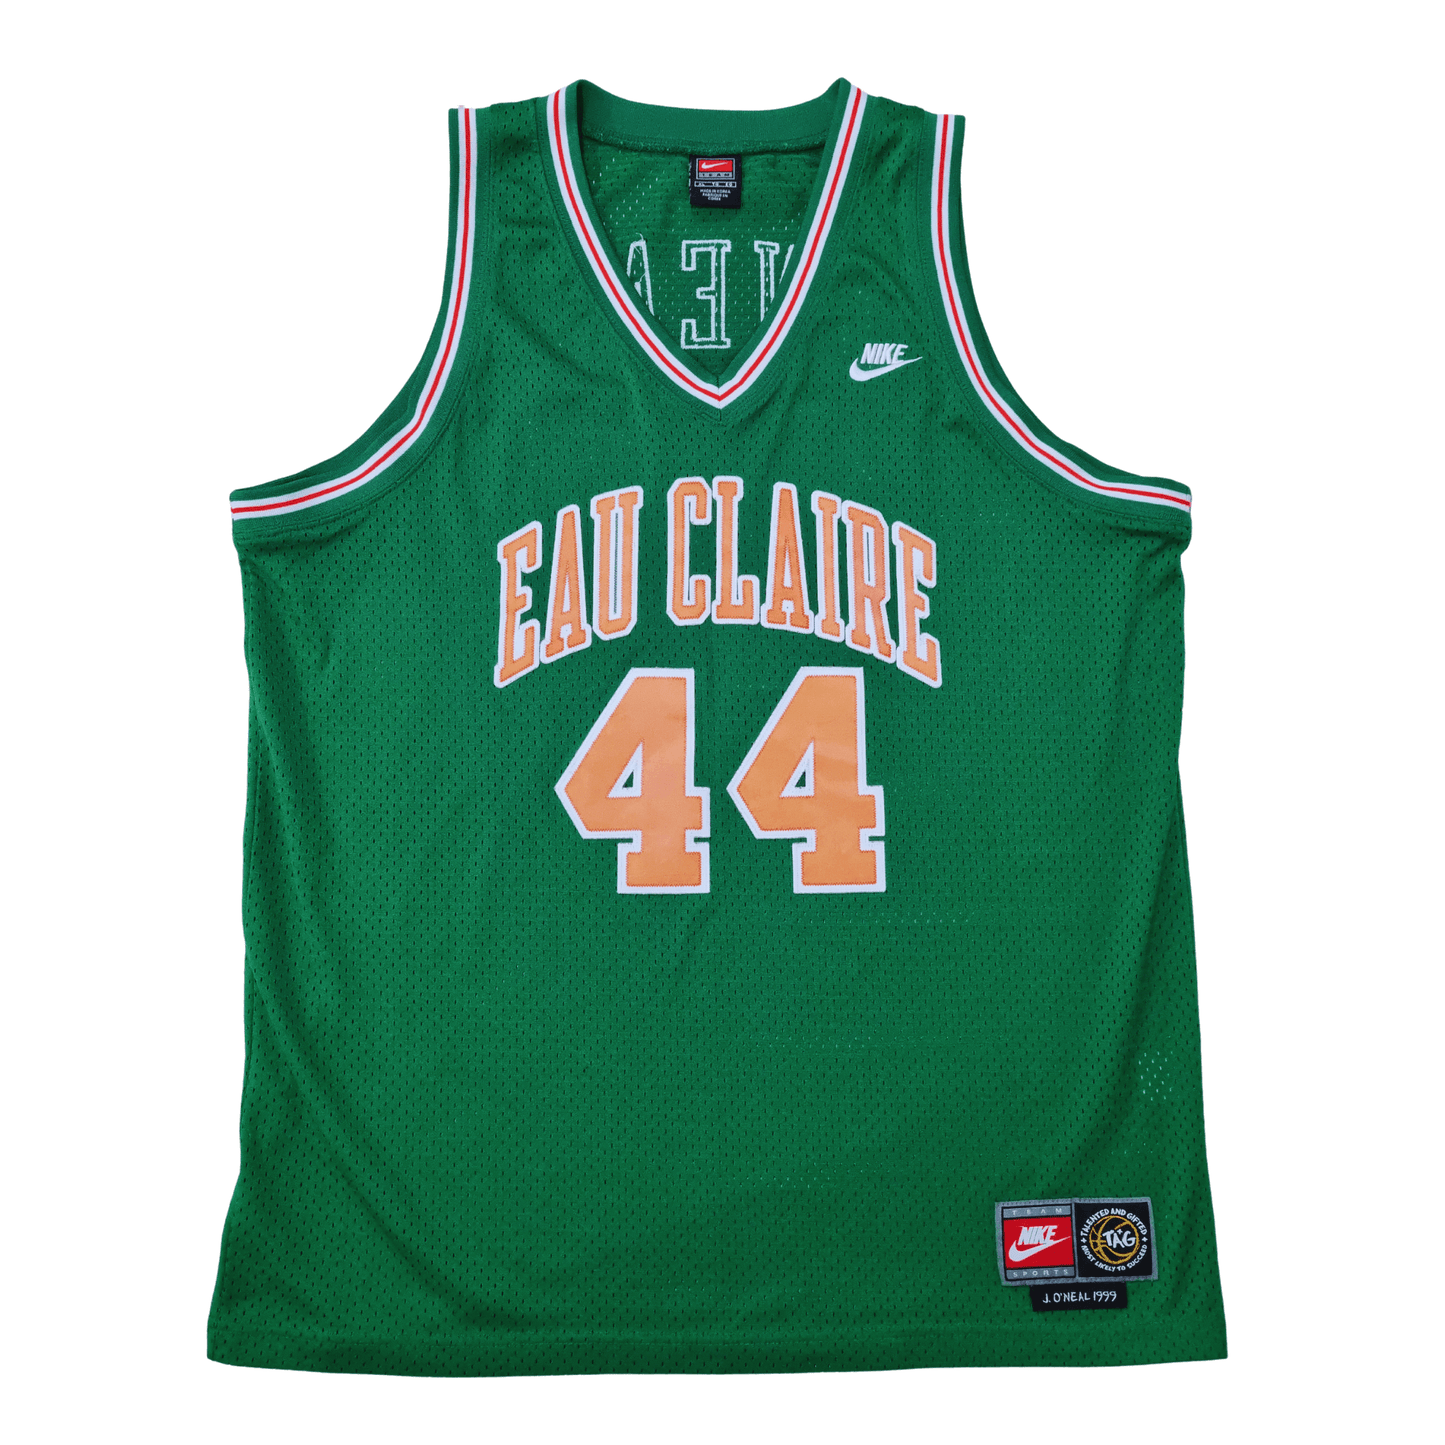 Eau Claire High School 1999 Jersey Front - Jermaine O'Neal